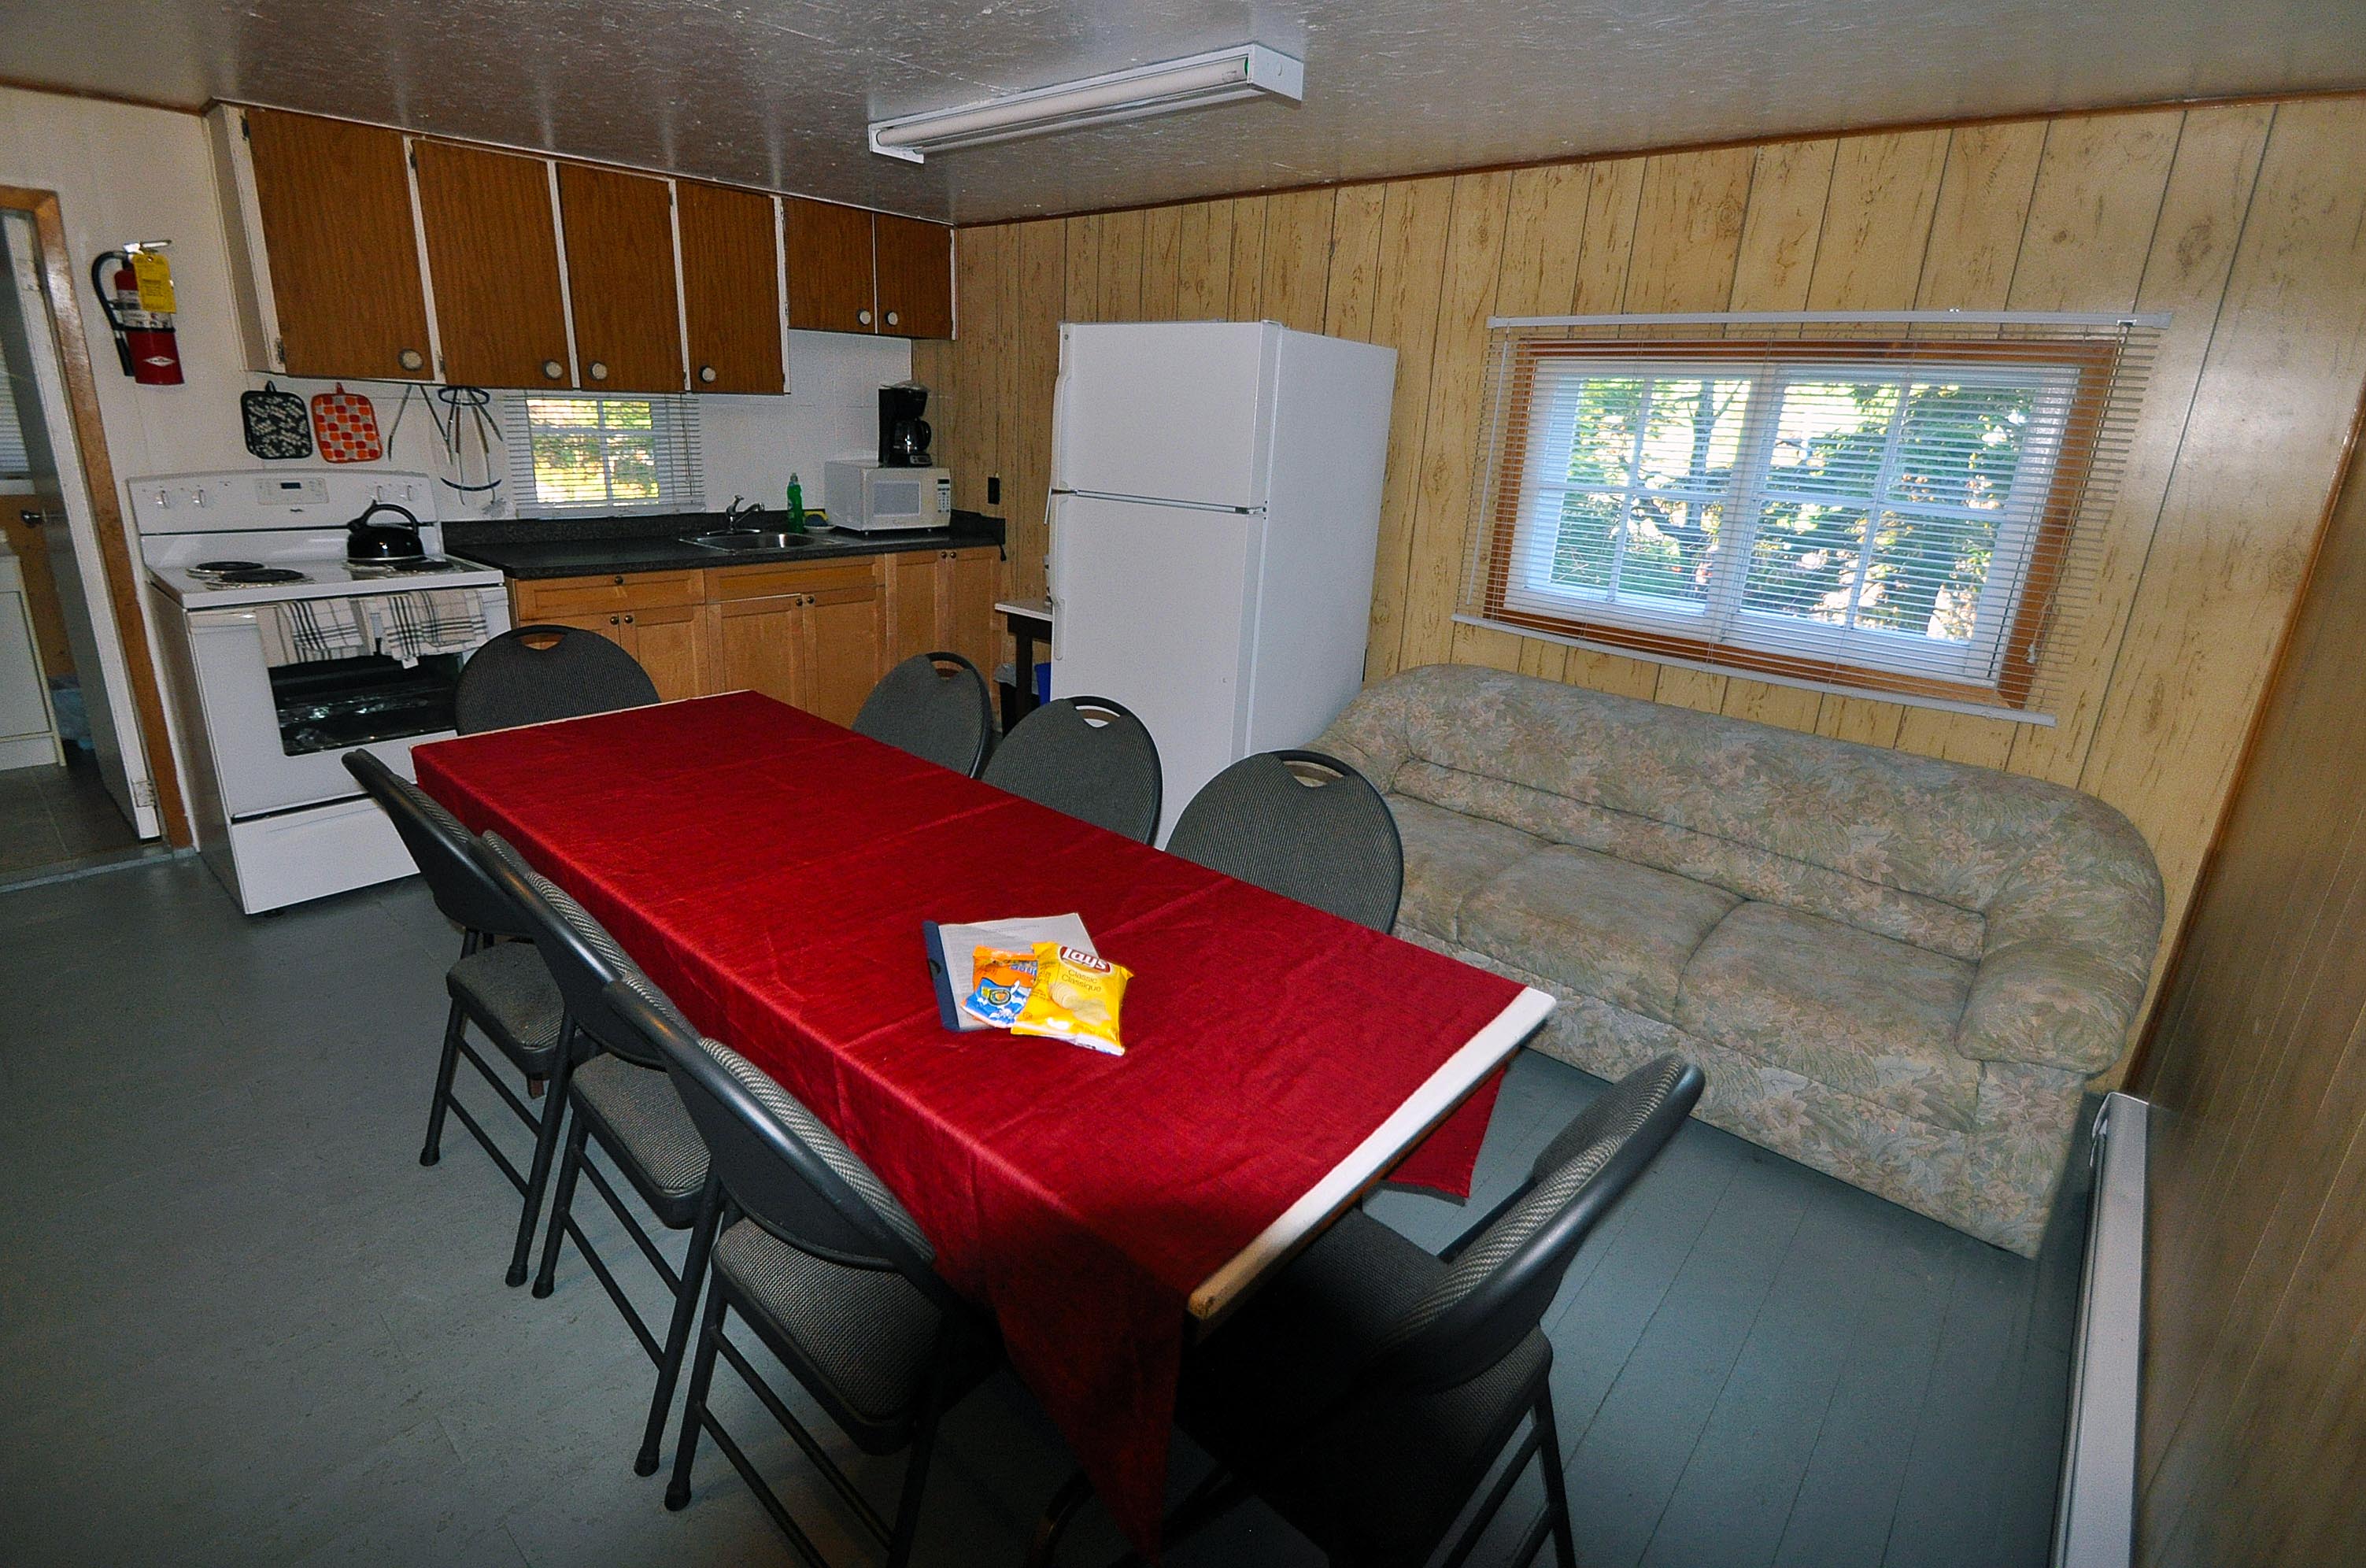 Cabin 16 kitchen, dining table and sofa.